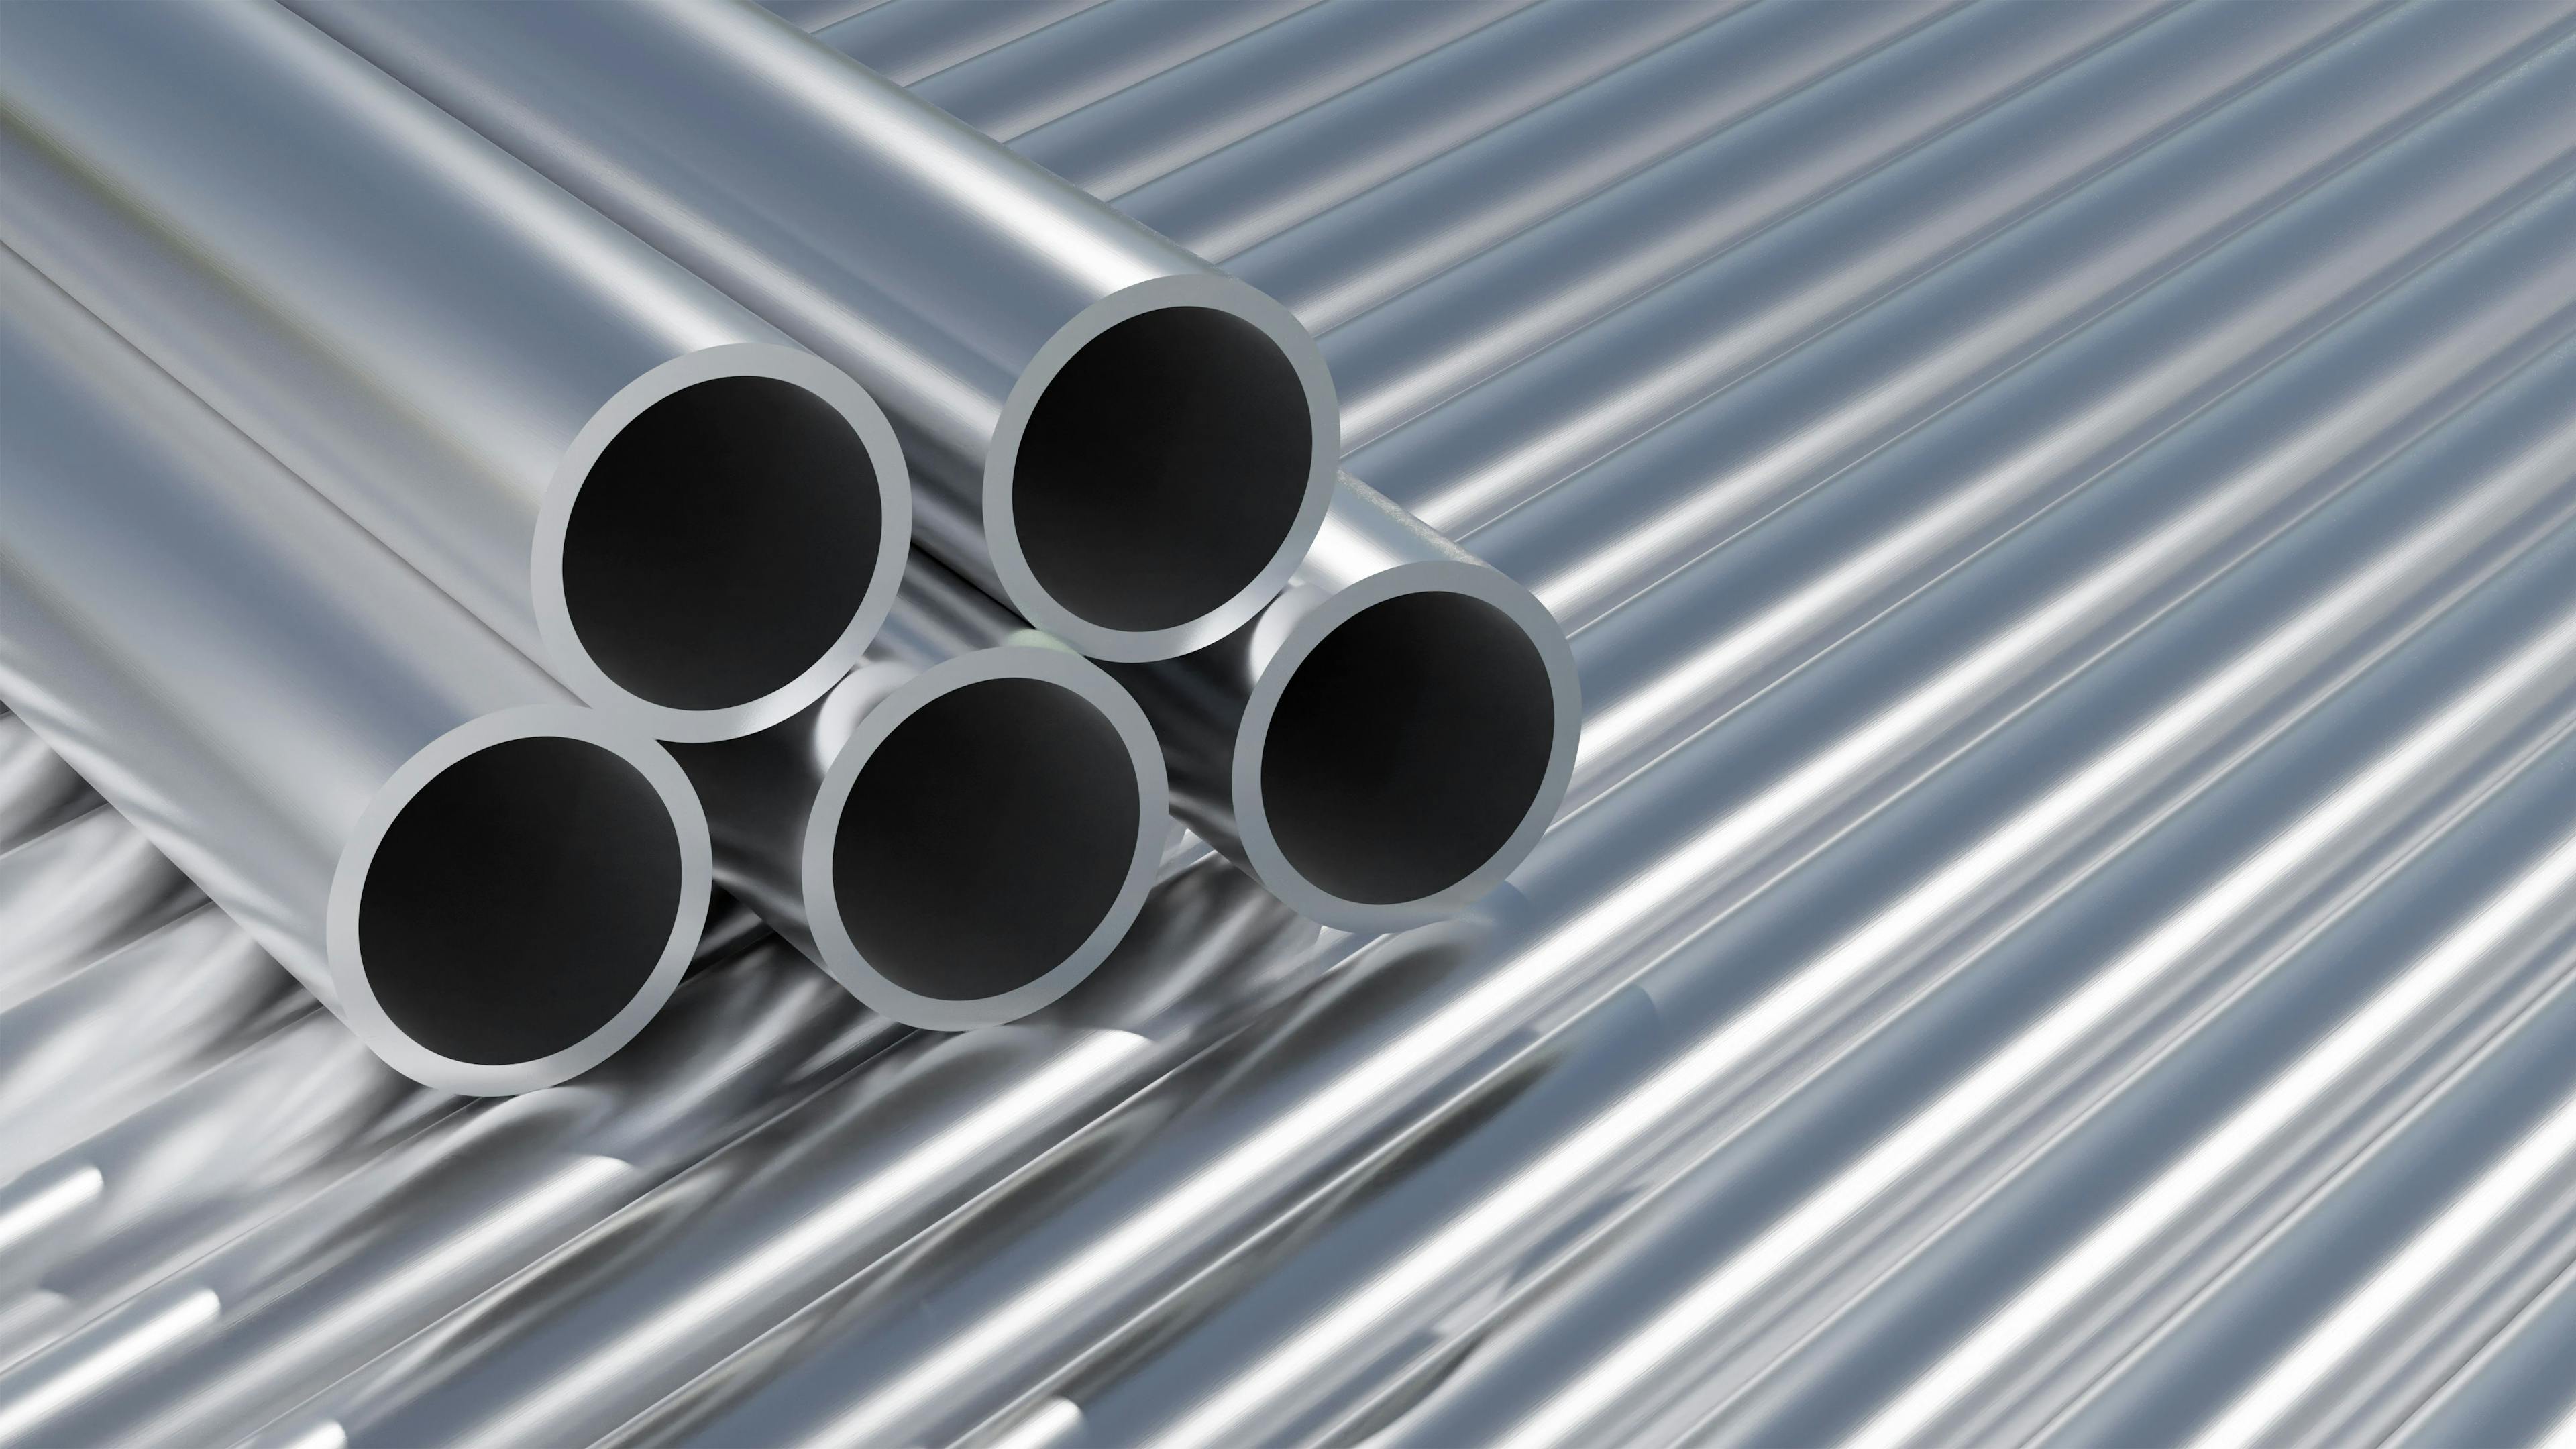 Group, set of simple new high quality shiny galvanized stainless steel metal aluminium alloy pipes stacked, iron pipes, industrial construction materials, supplies storage, warehouse stock, nobody | Image Credit: © Tomasz - stock.adobe.com